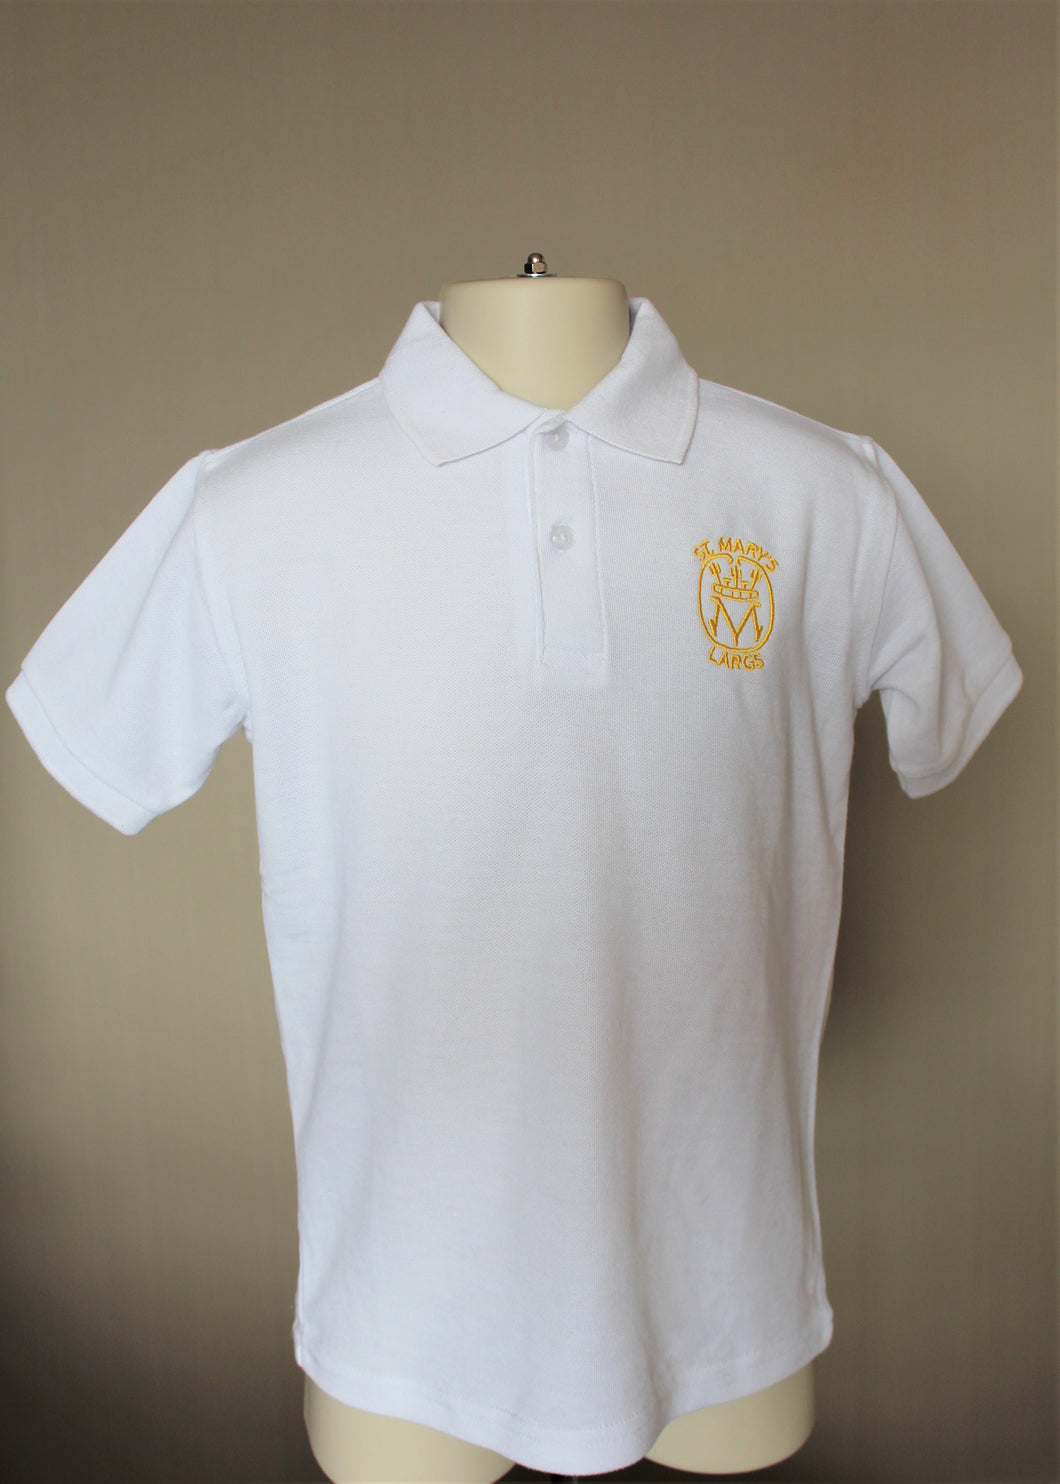 white polo shirt for PE and every day at school, part of St Mary's Primary school uniform Largs